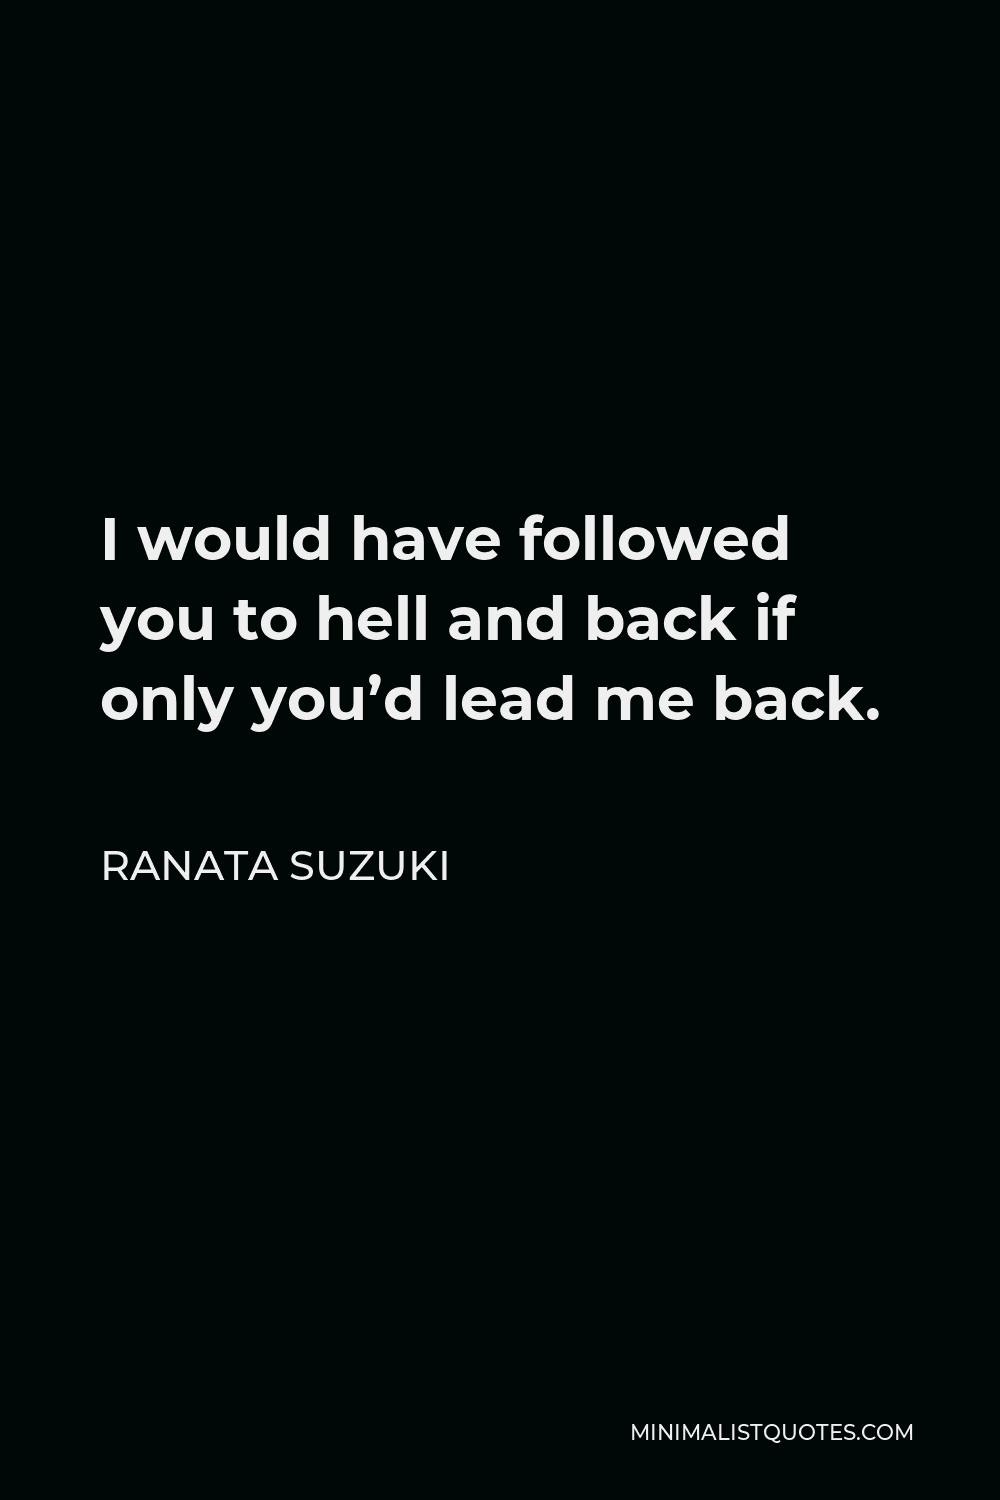 Ranata Suzuki Quote - I would have followed you to hell and back if only you’d lead me back.